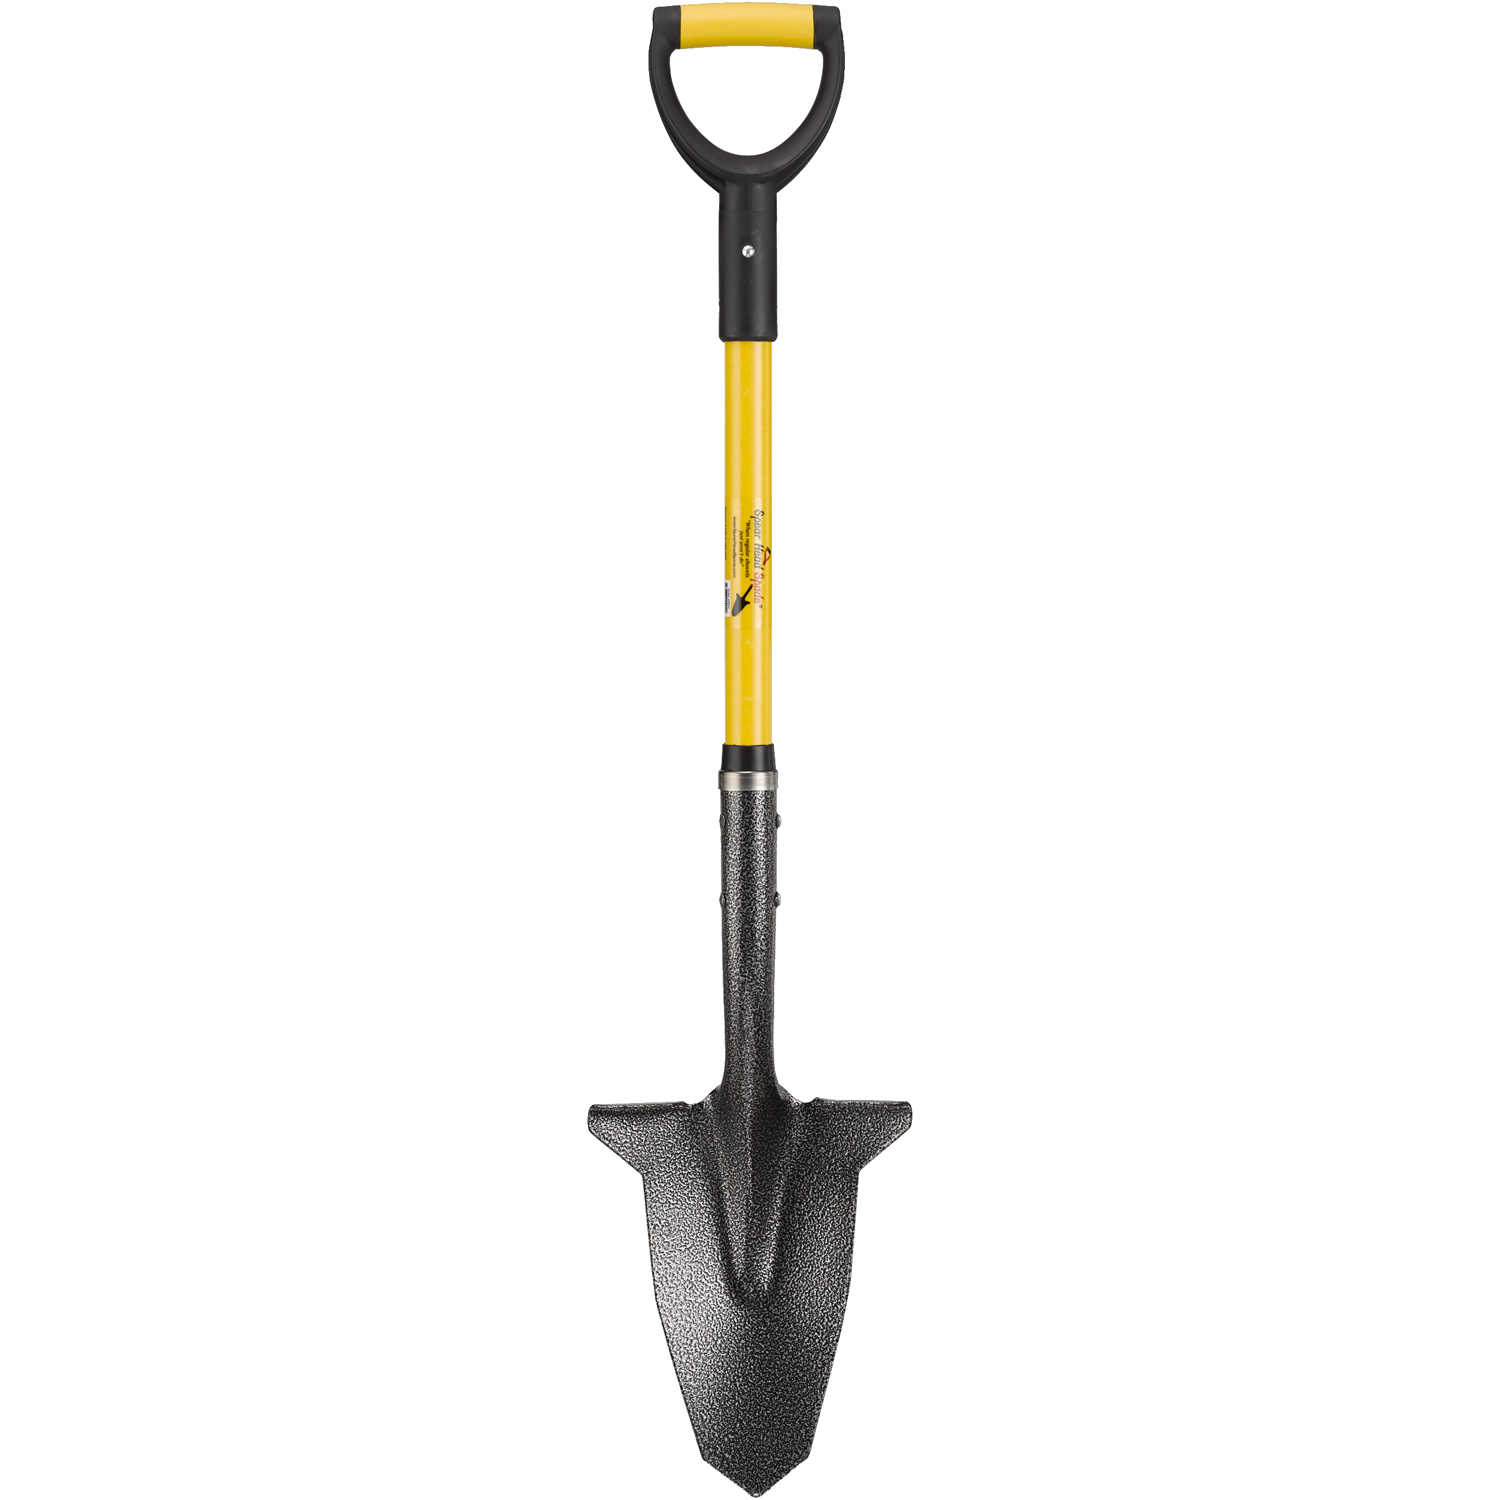 Twin Shov-Holer Spear & Jackson H/D All Steel Double Action Post Hole Spade 